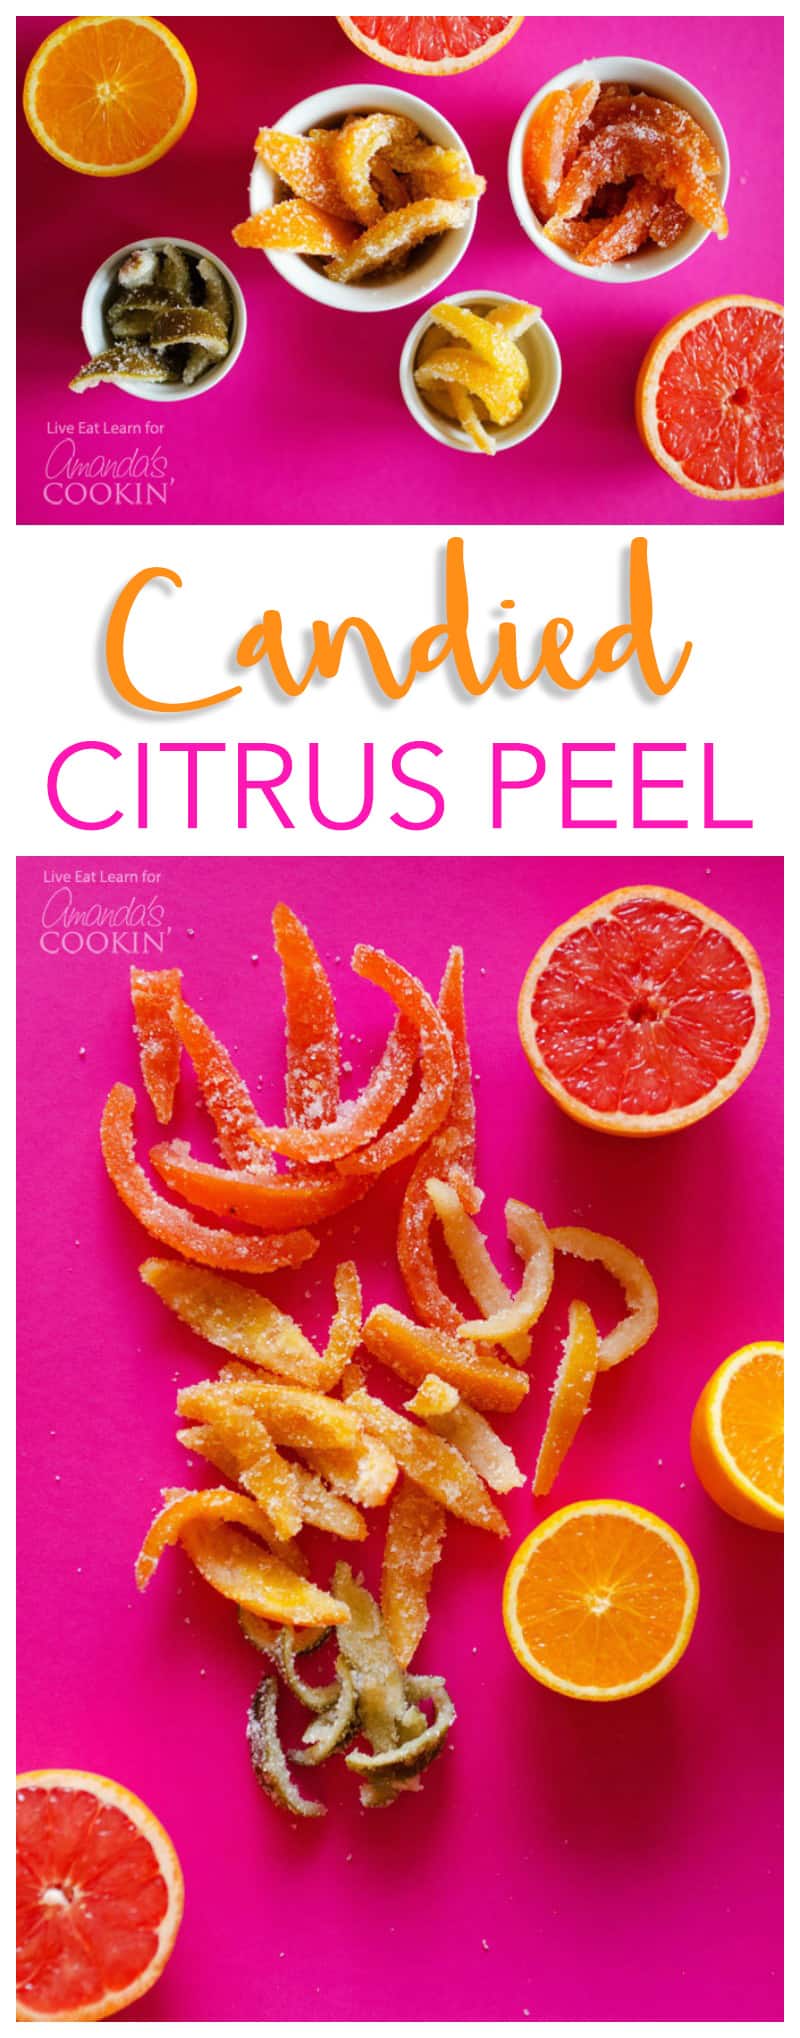 Photos of candied citrus peels.